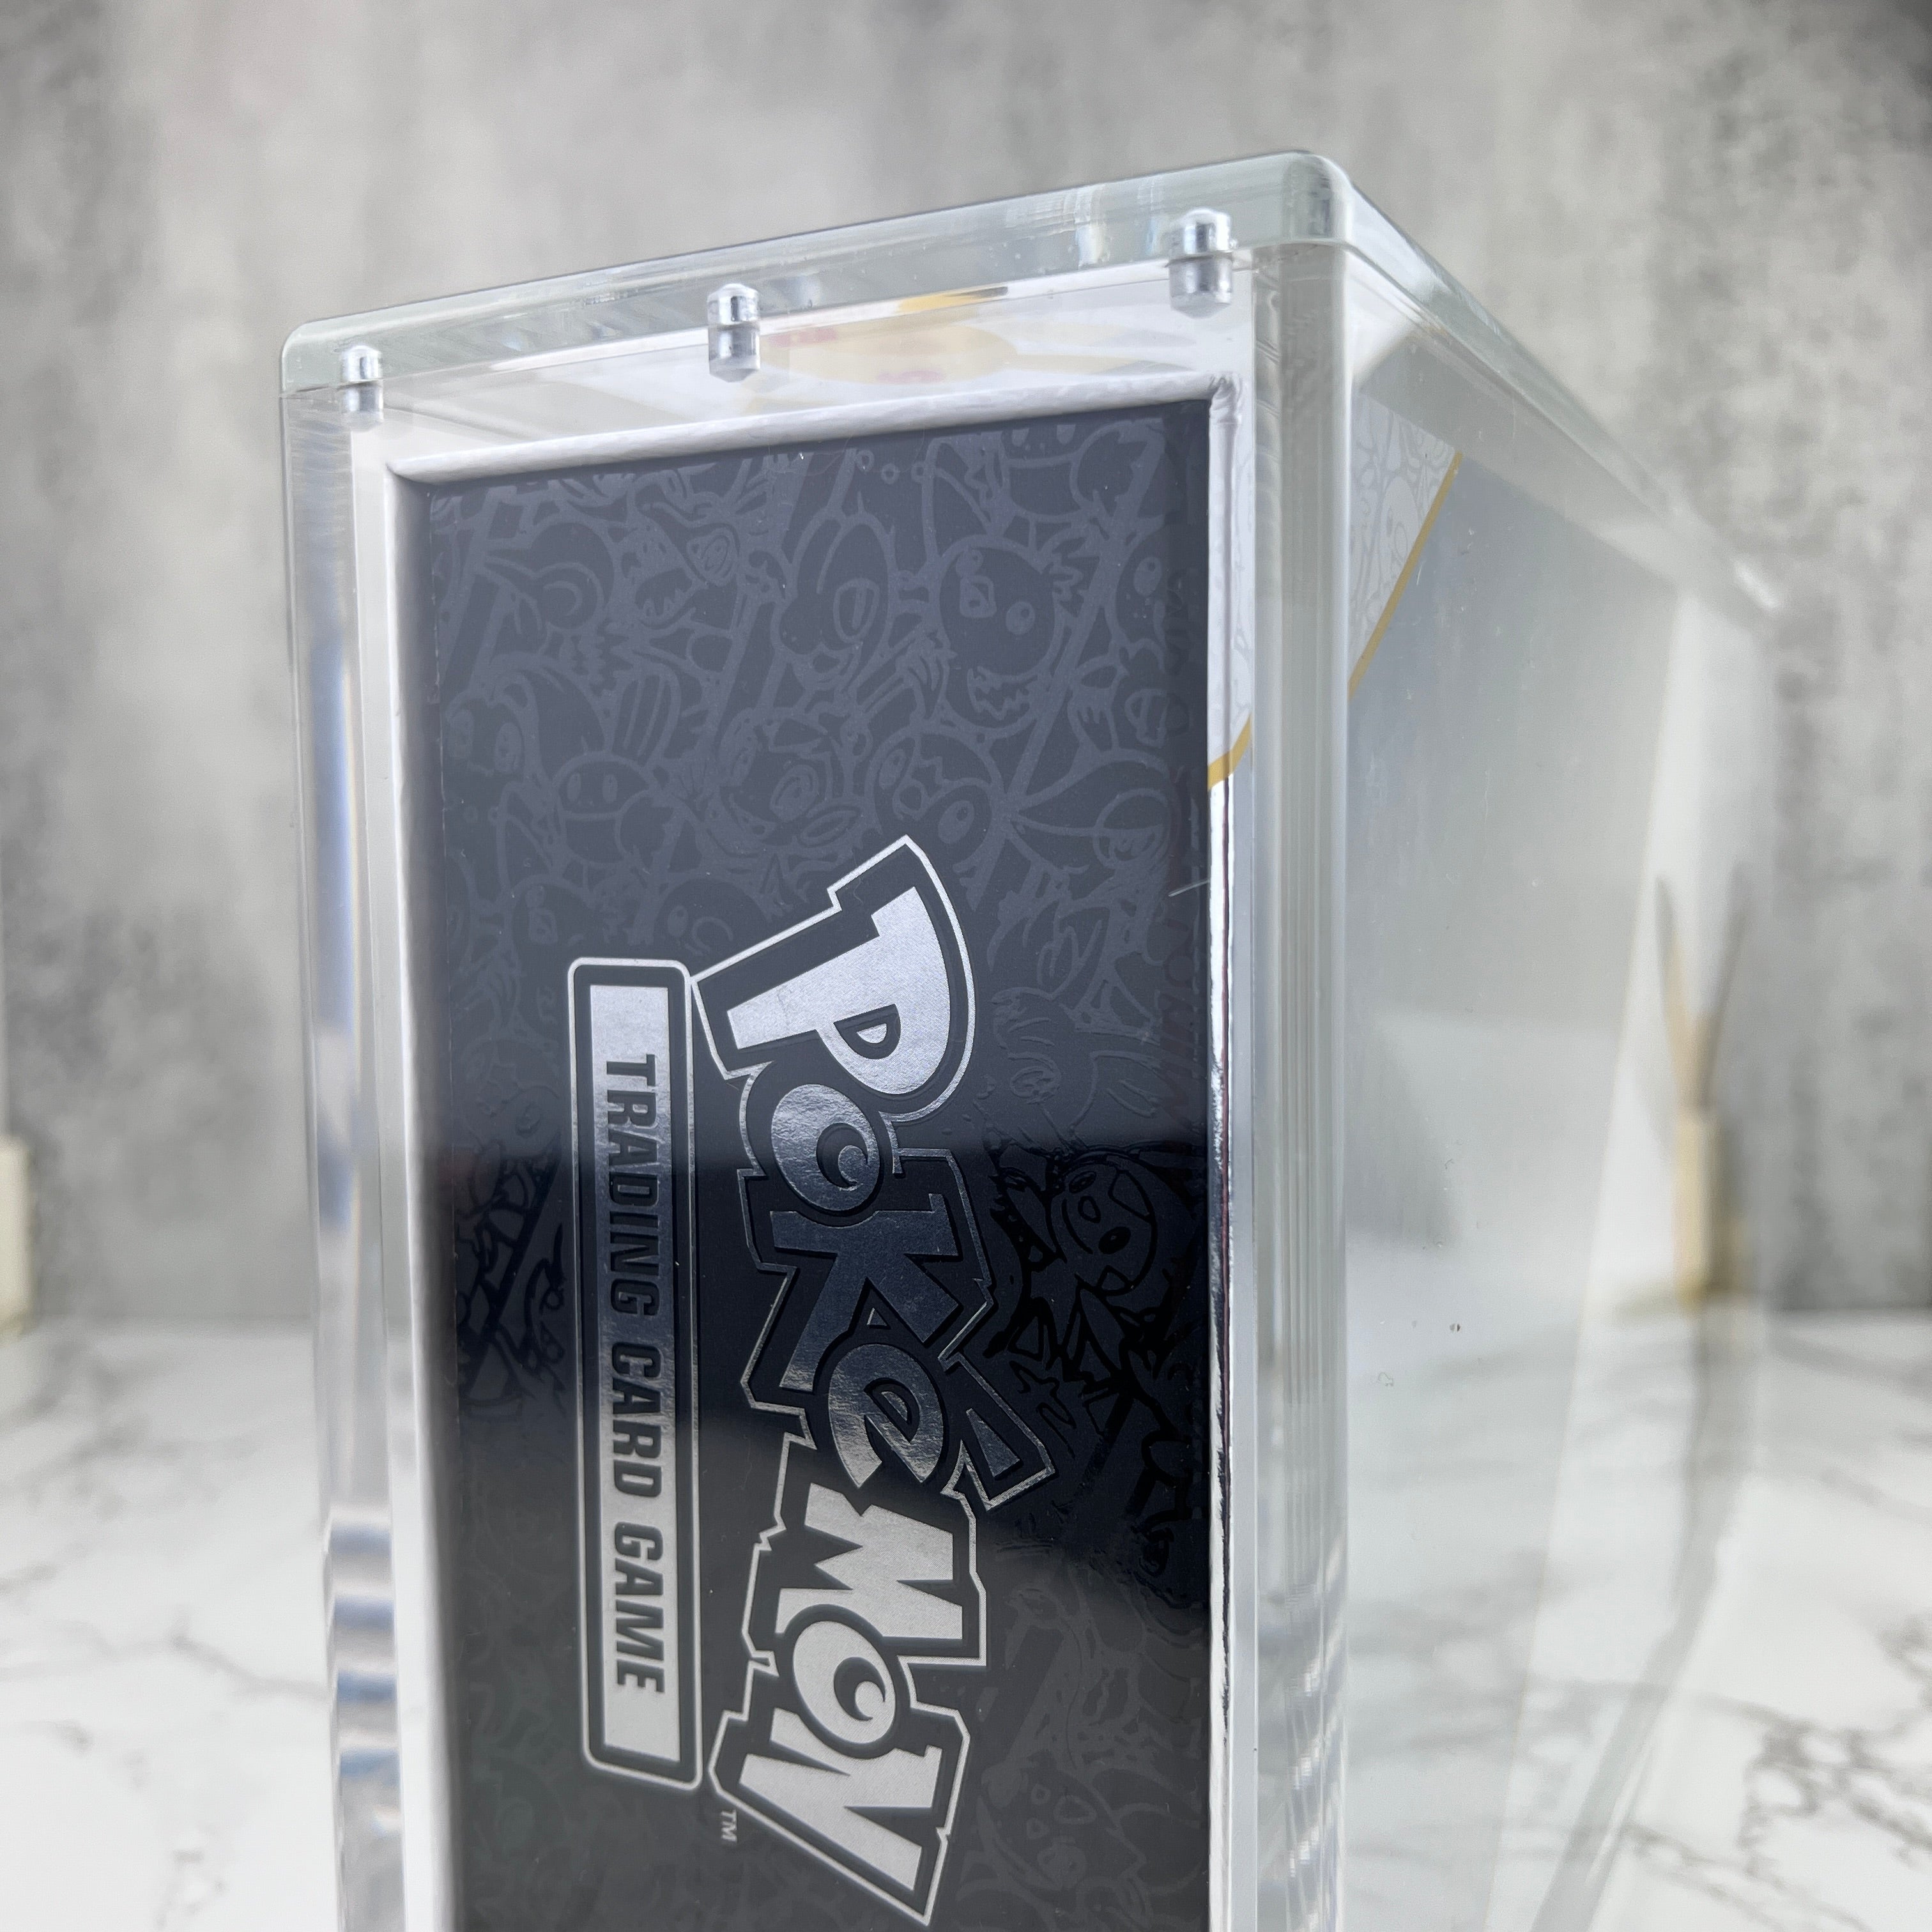 Pokemon Ultra Premium Collection Box magnetic acrylic protective case. Crystal clear acrylic, with UV resistance. 